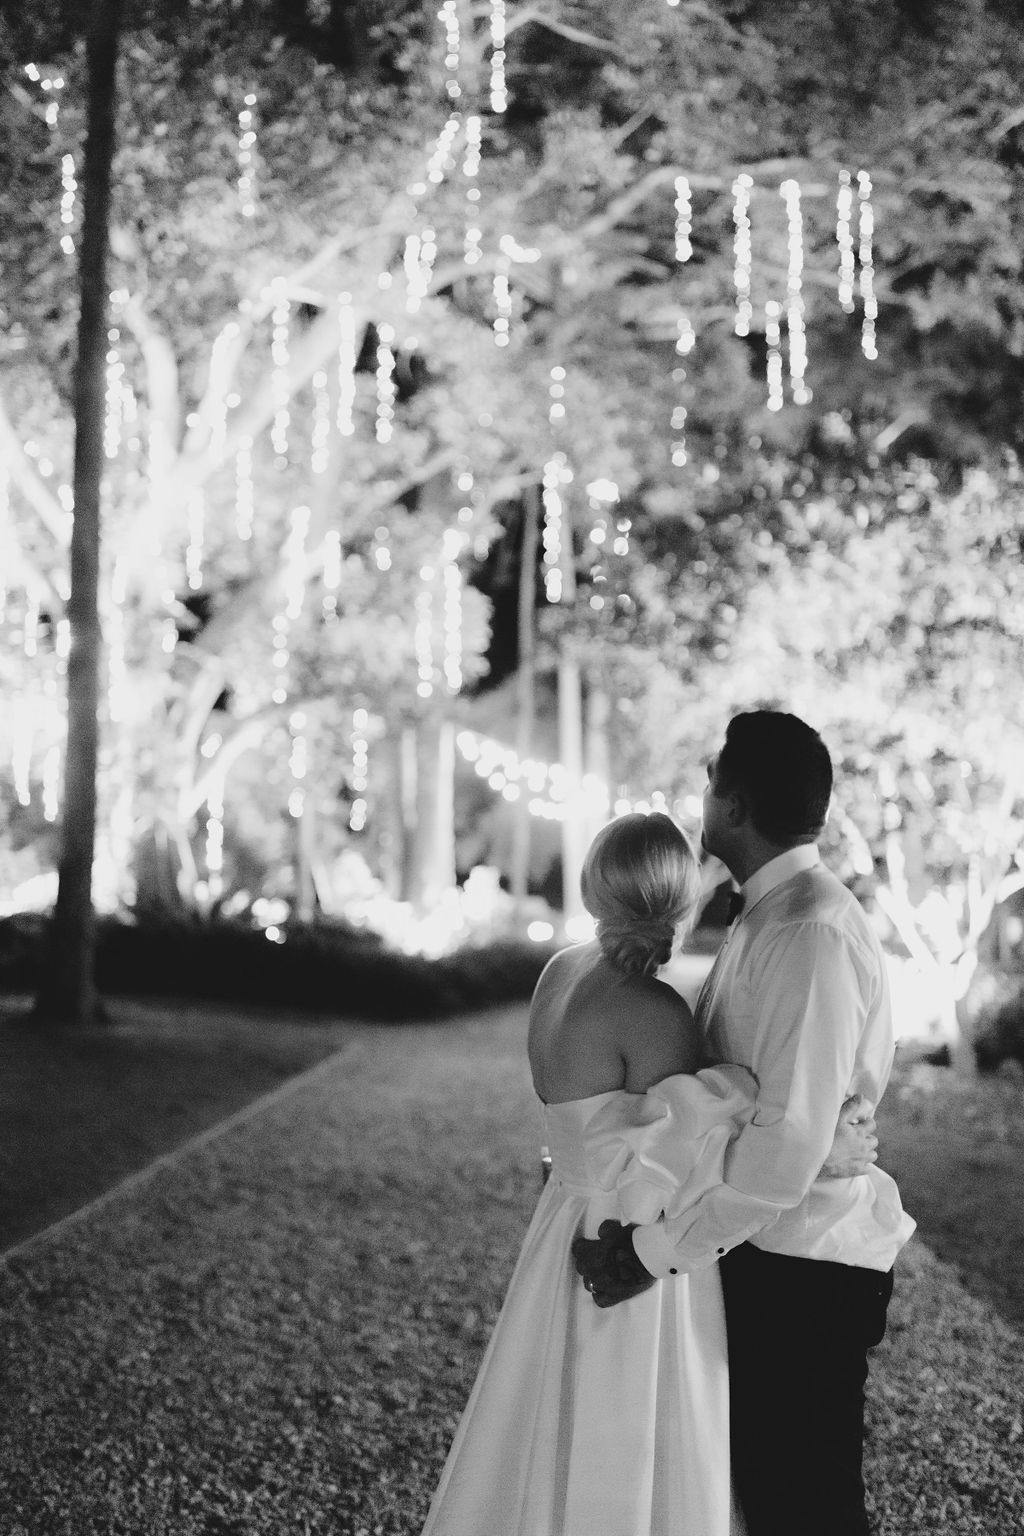 A black-and-white photo of a couple embracing from behind. They are facing a pathway adorned with hanging string lights draped over trees. The woman is wearing a strapless gown, and the man is dressed in a shirt and pants. The scene is calm and romantic.